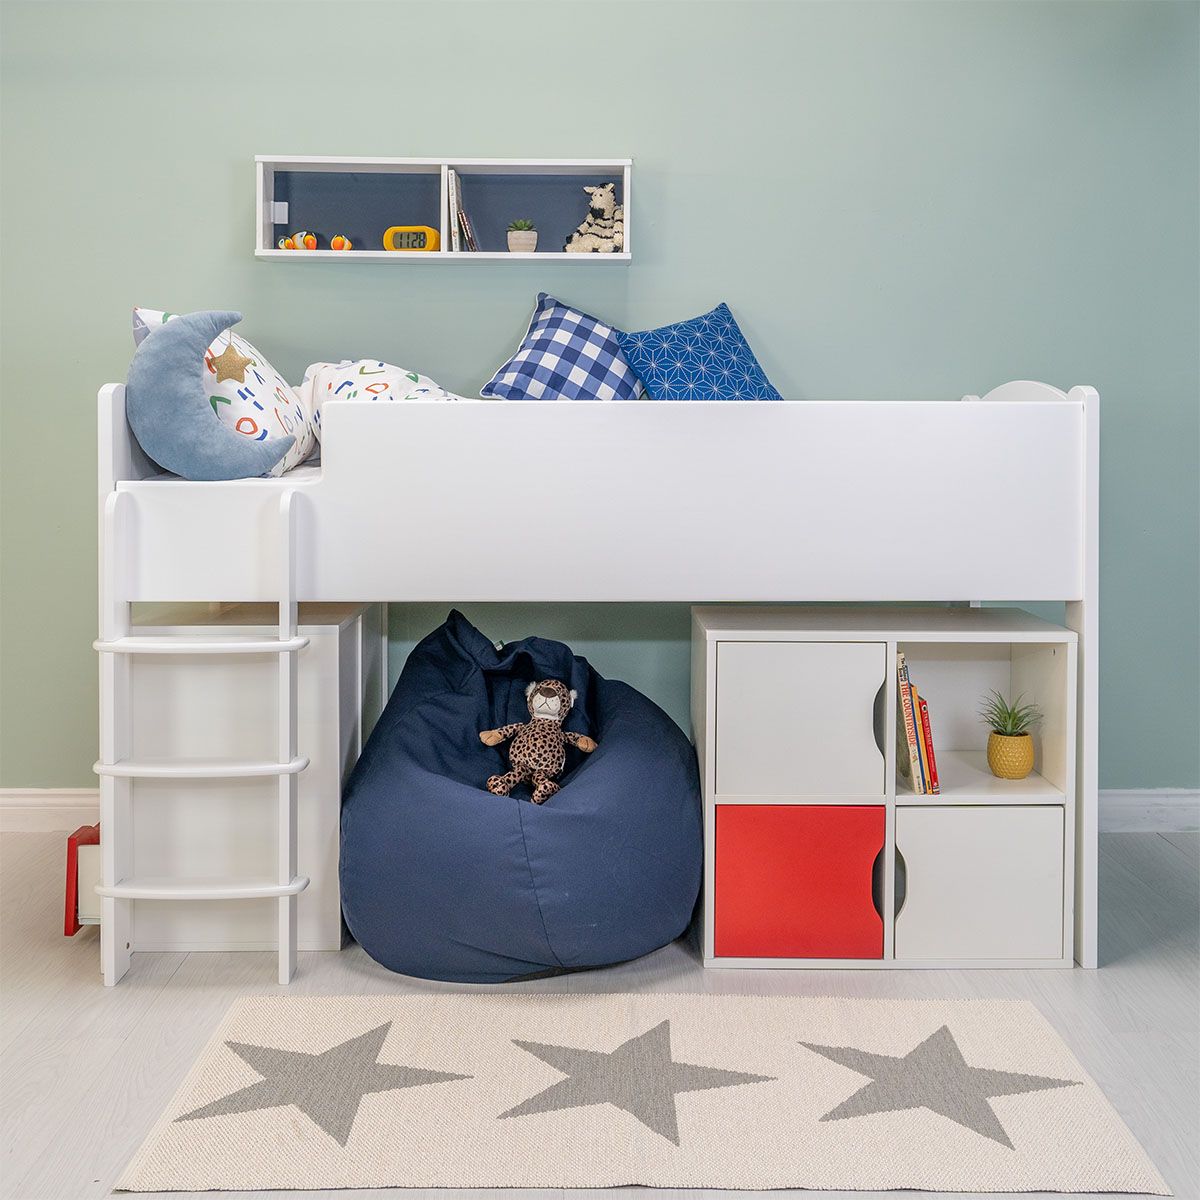 The White Mid Sleeper Bed (LEFT)